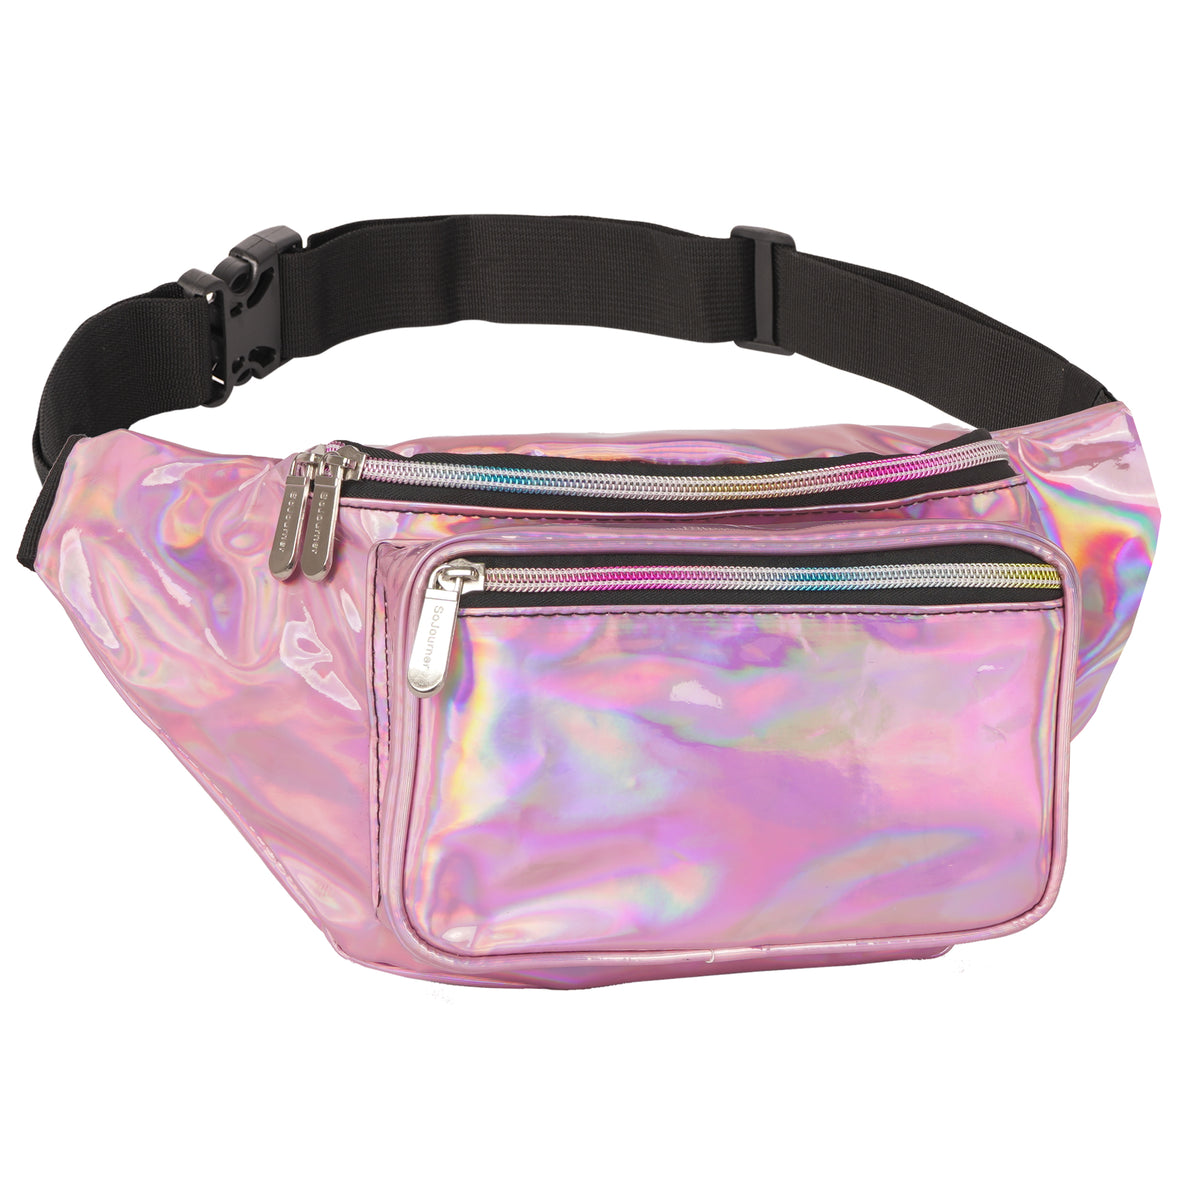 Rose Gothic Print Fanny Pack Waist Bag Zippered Pocket With